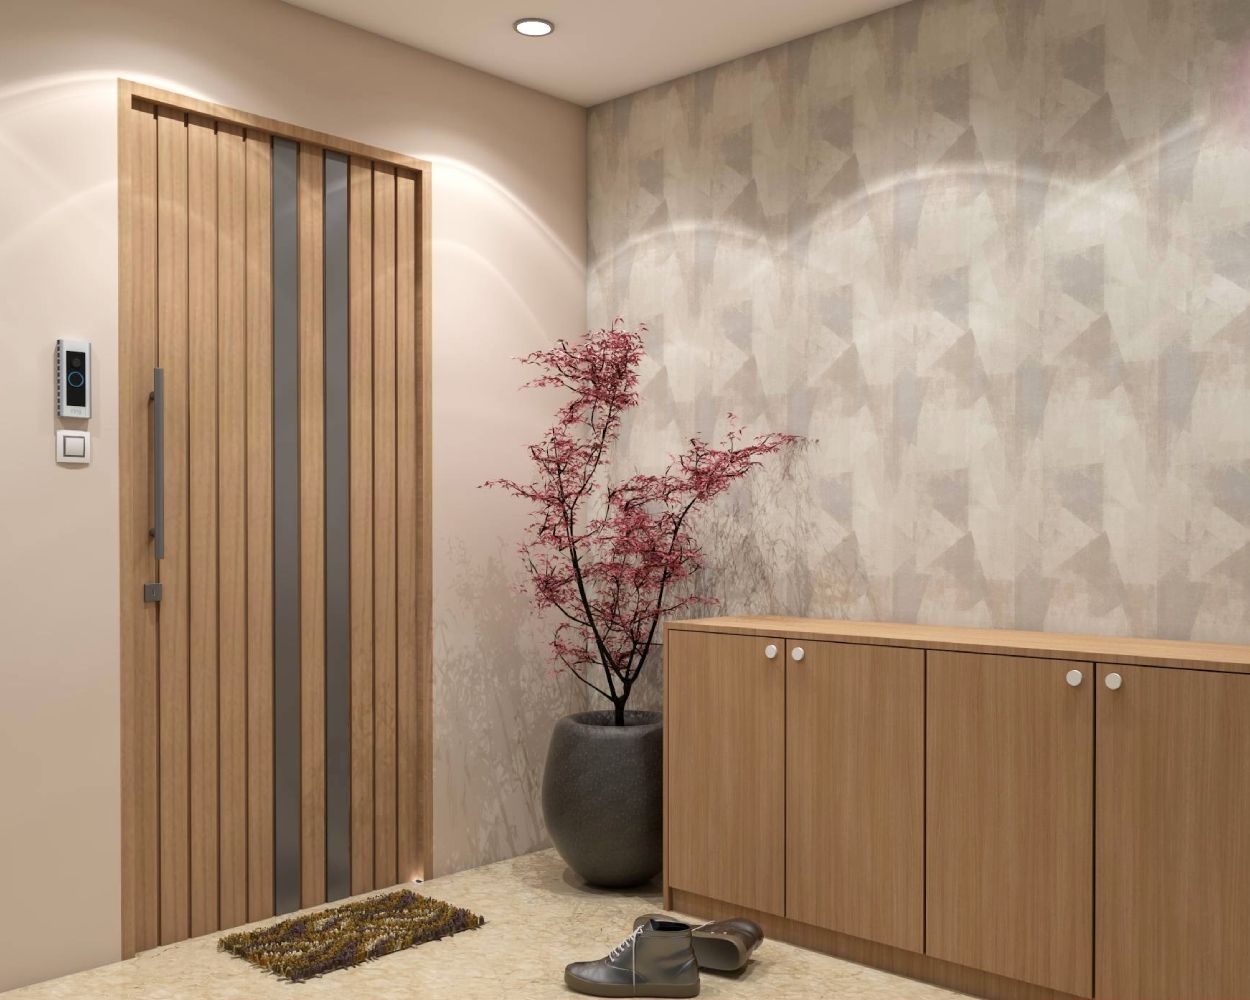 Modern Foyer Design With 4-Door Wooden Storage Cabinet And Patterned Wallpaper